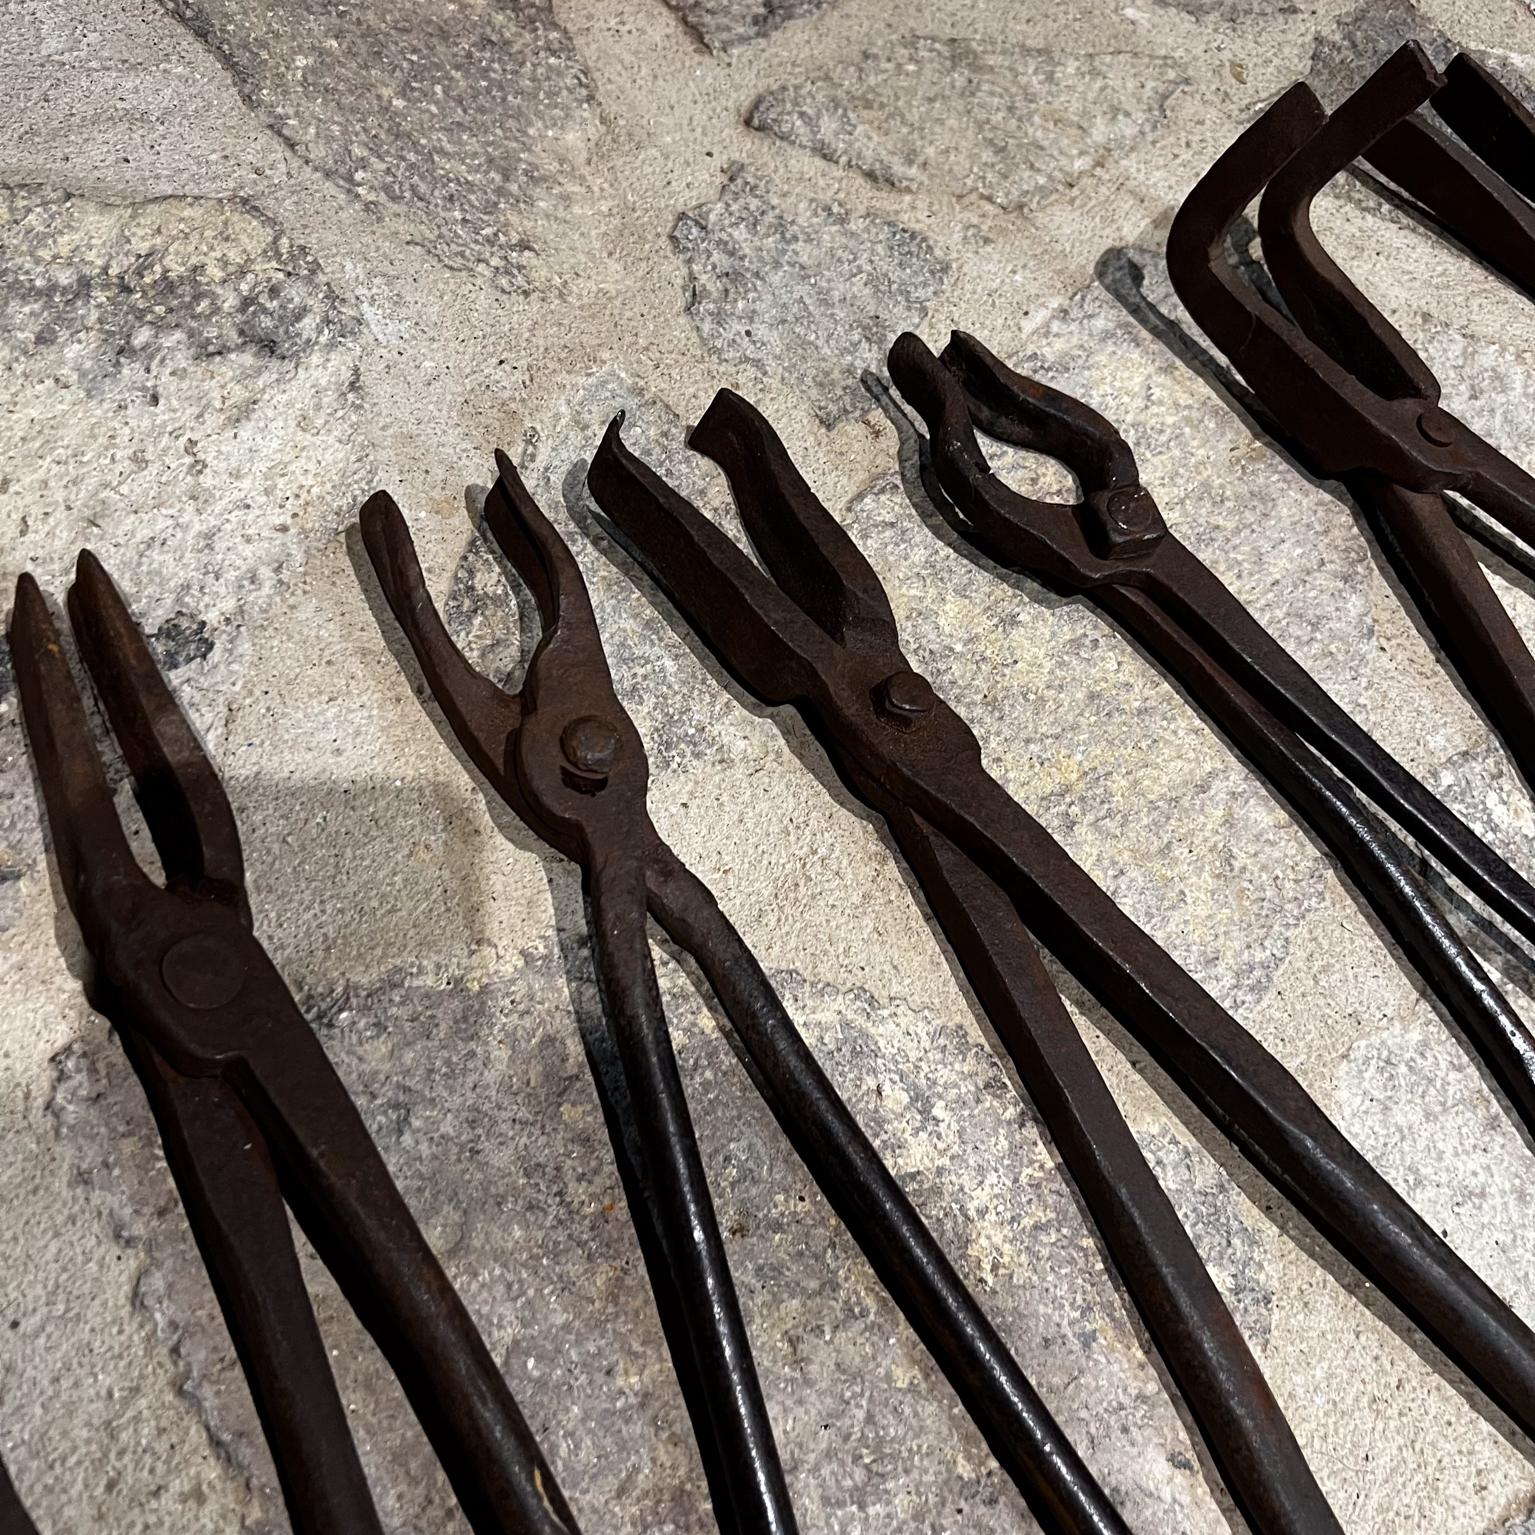  Antique Iron Worker Hand Forged Vintage Tools Set of 9 In Good Condition For Sale In Chula Vista, CA